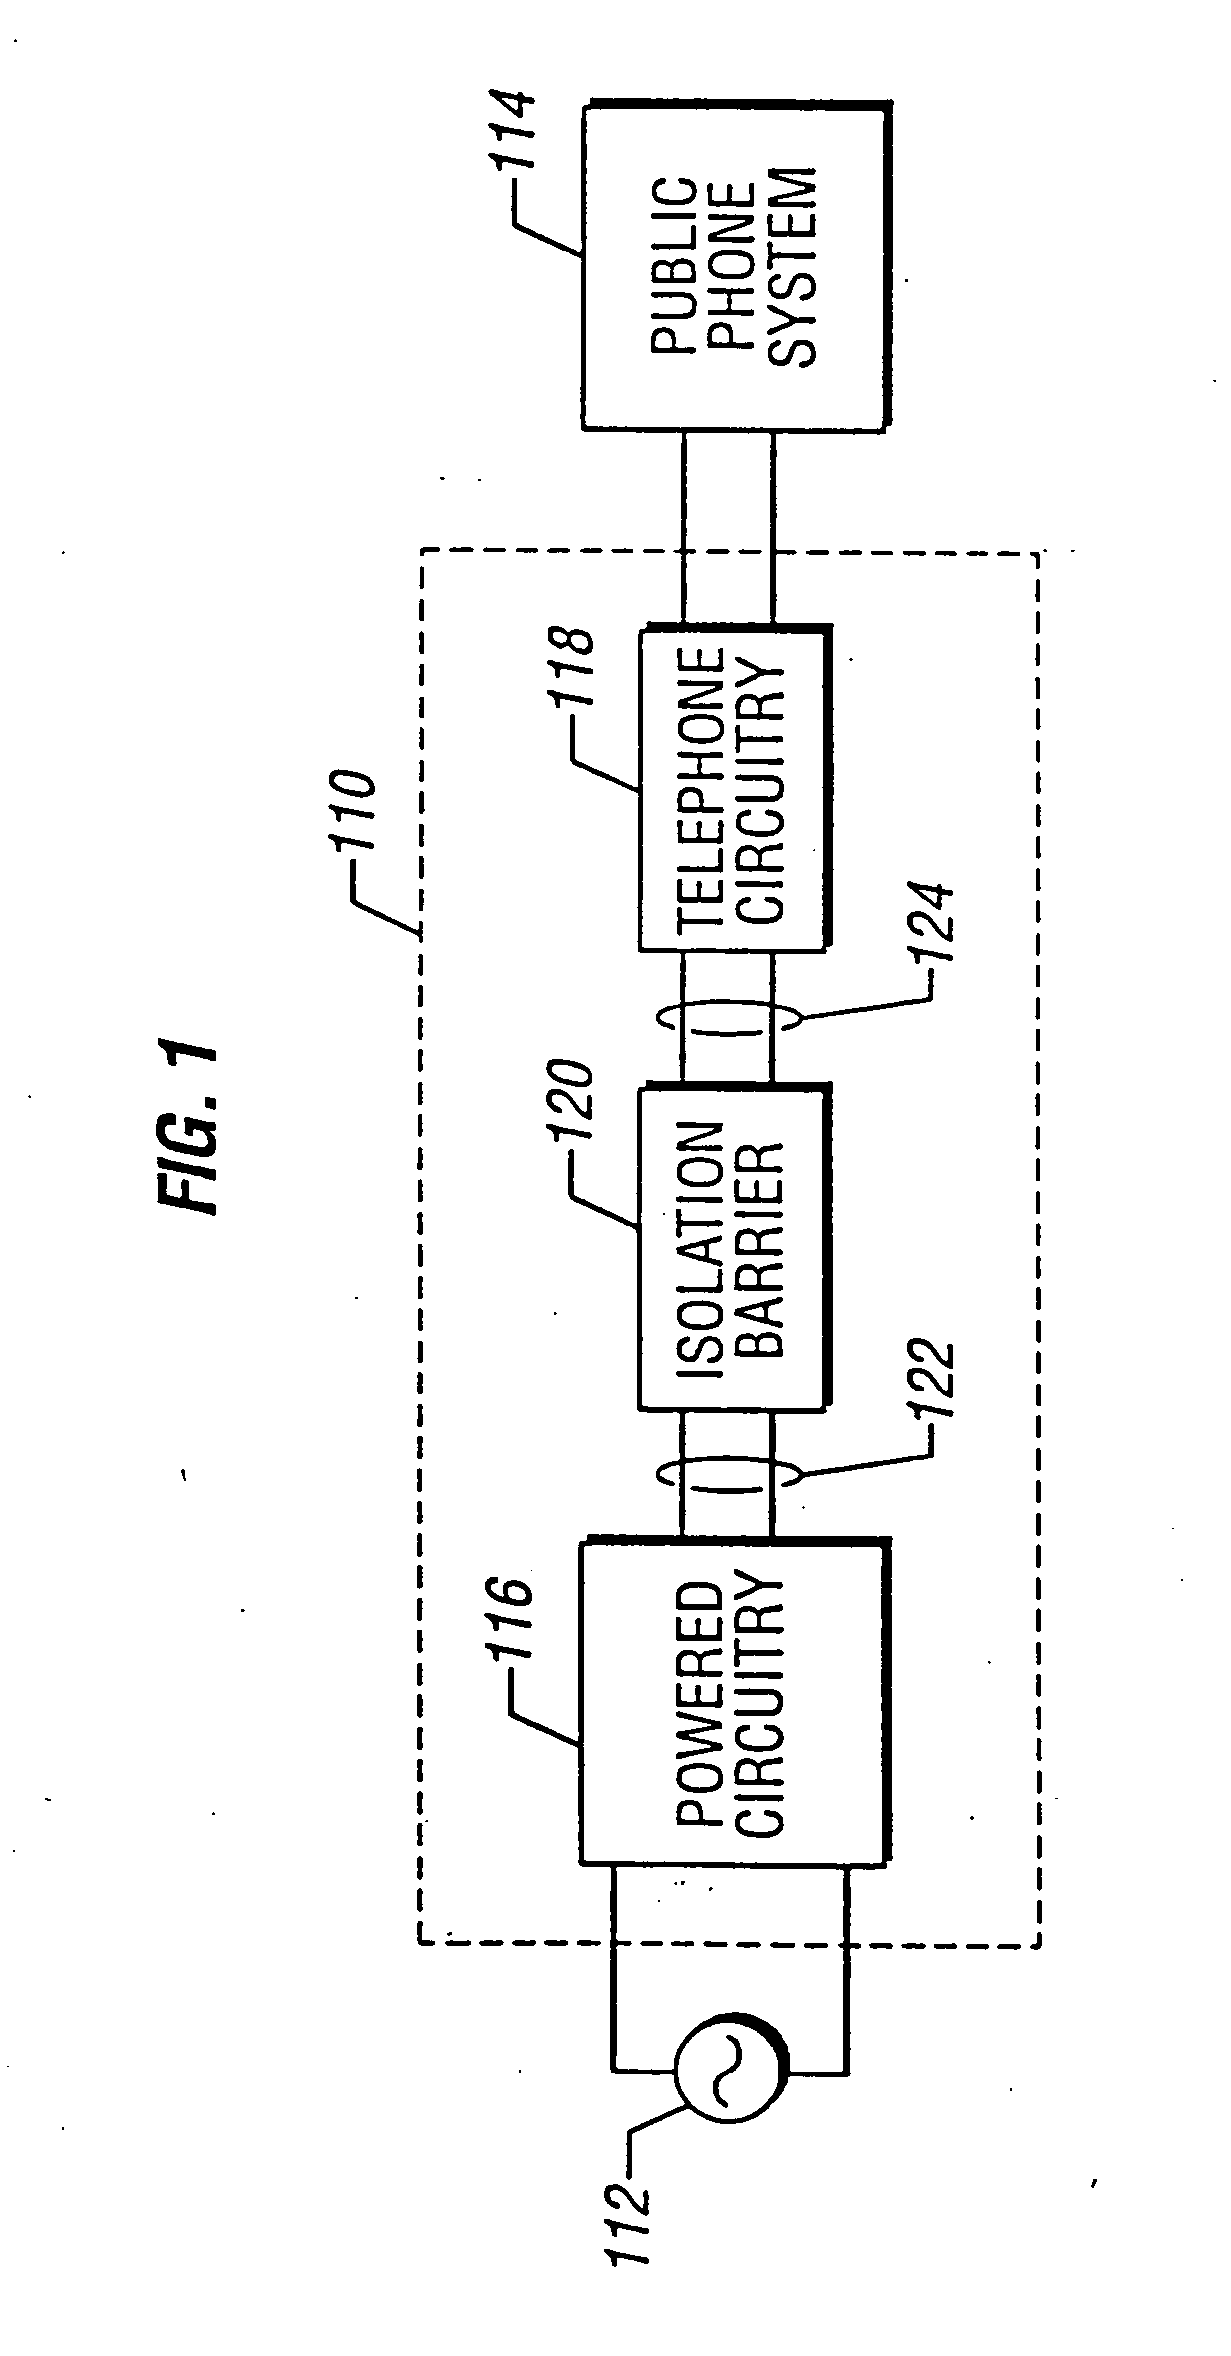 Direct digital access arrangement circuitry and method for connecting DSL circuitry to phone lines